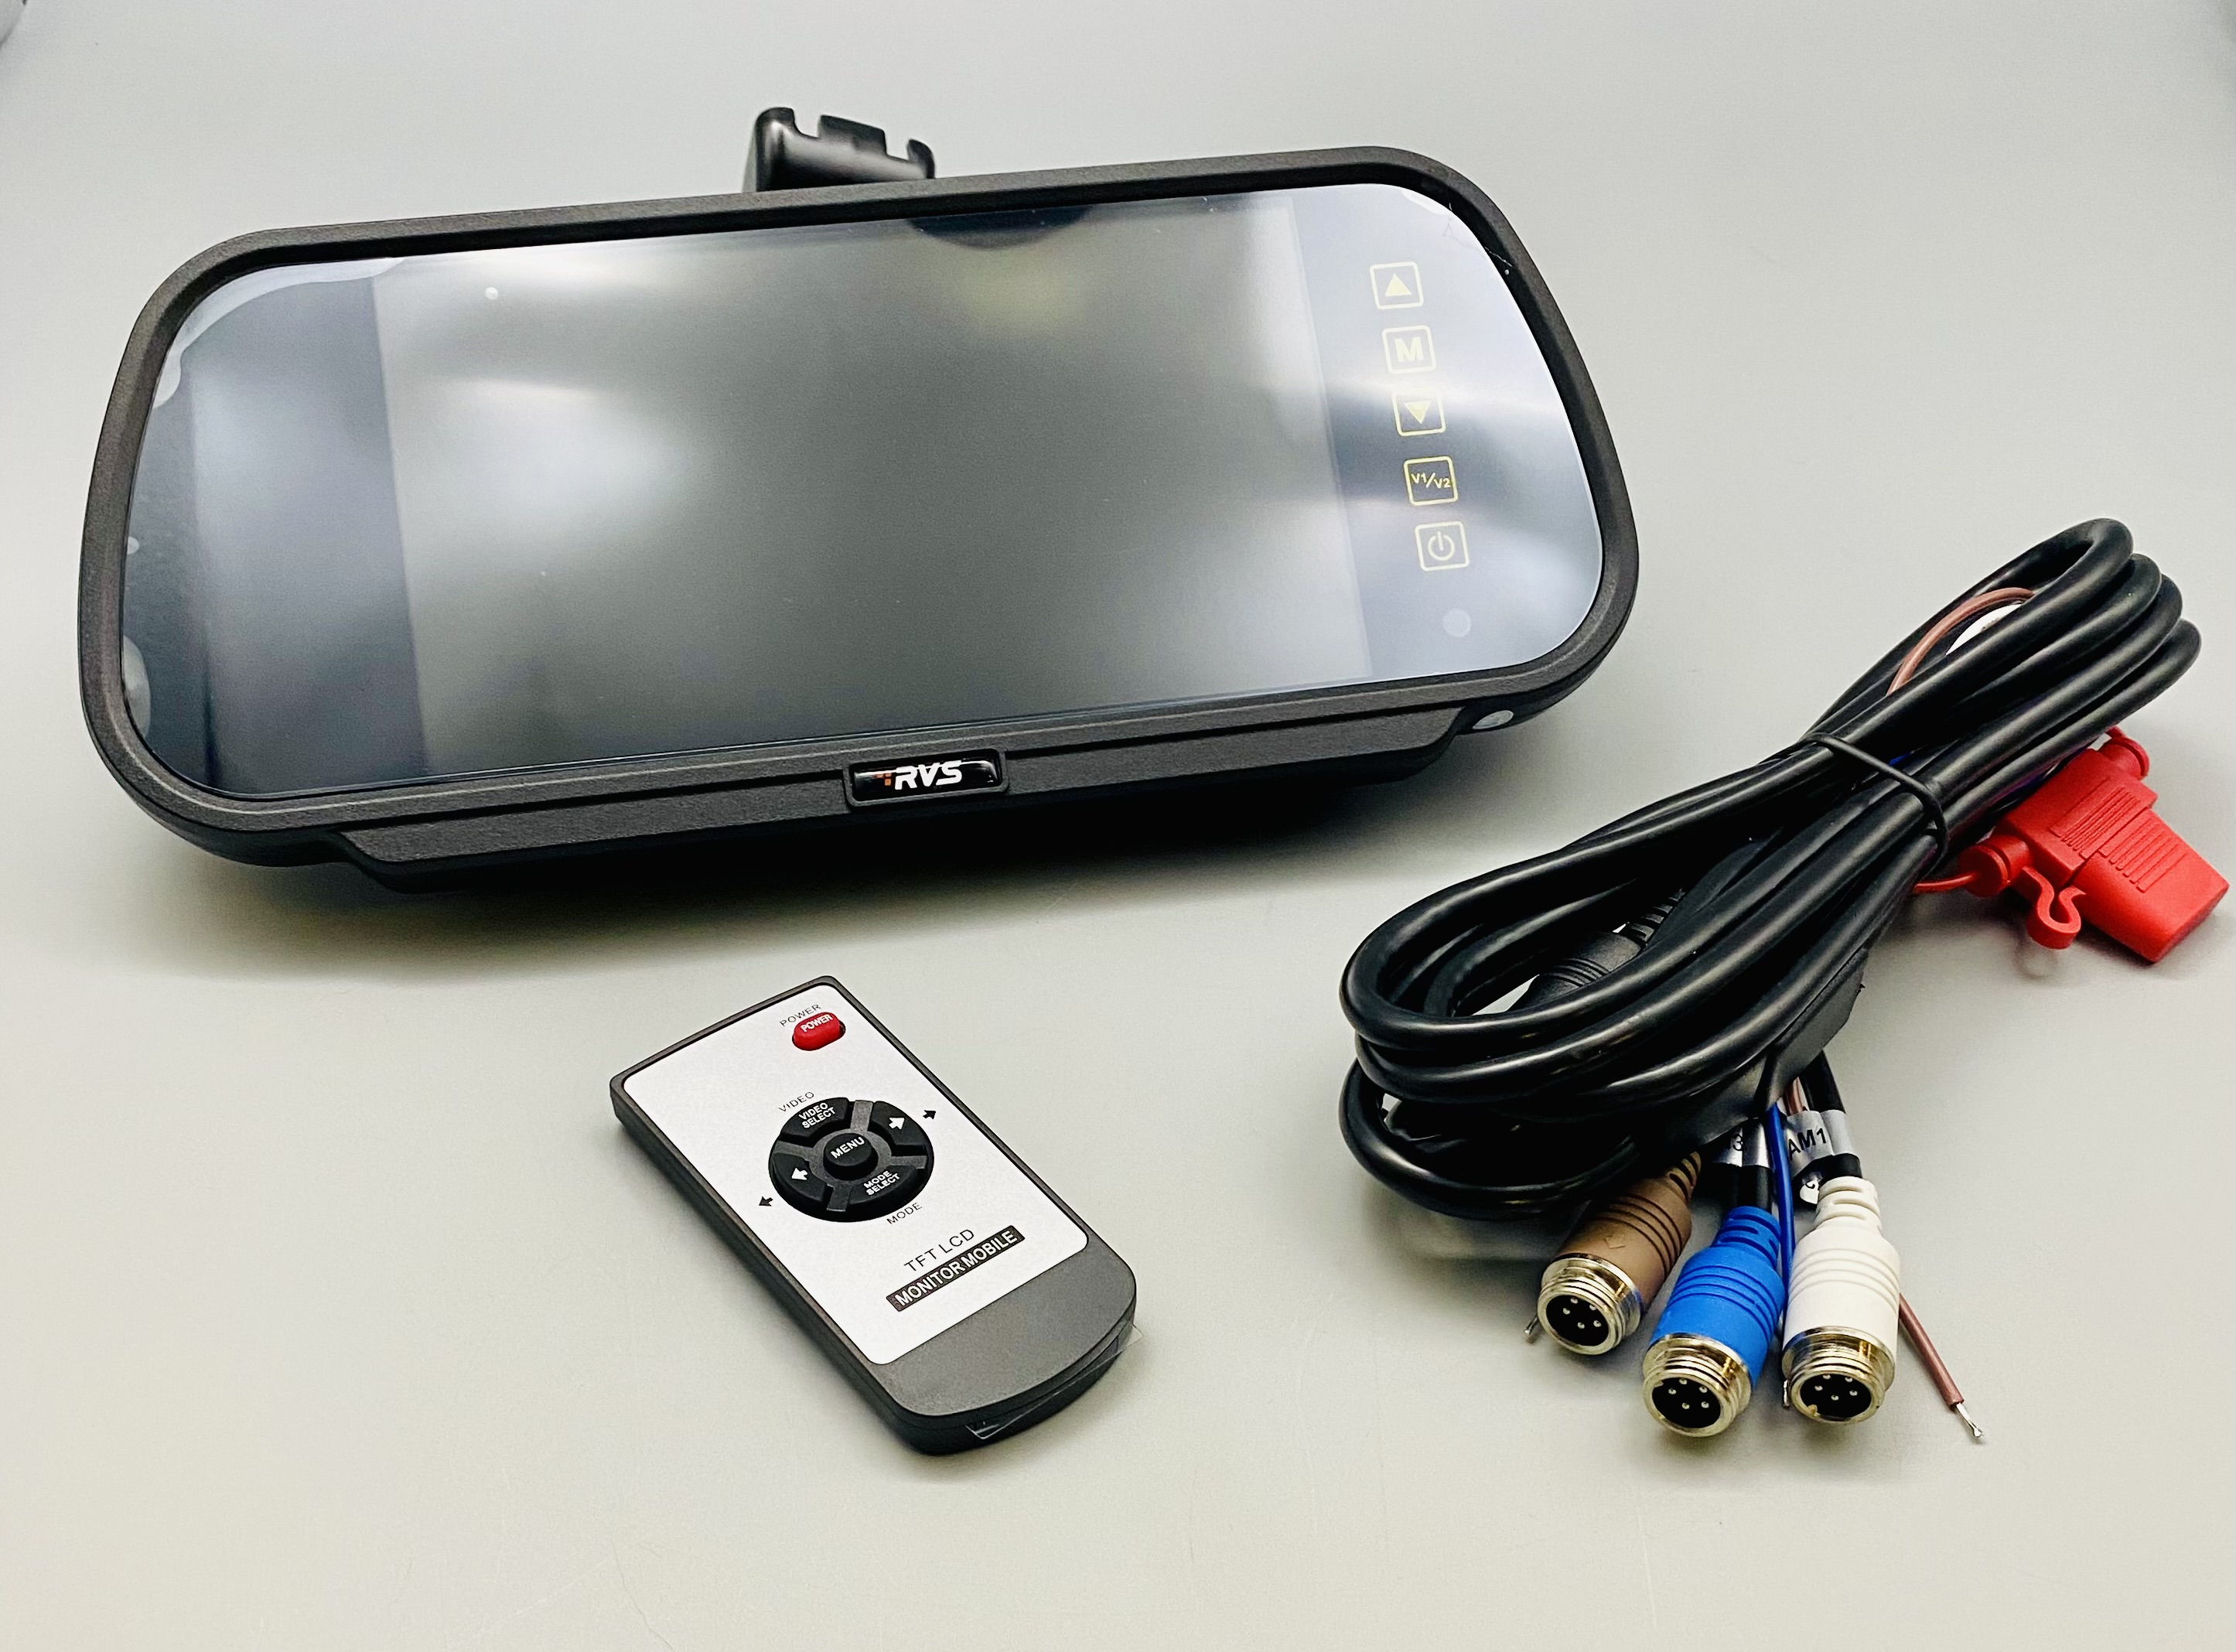 RVS 7" Rearview Mirror Replacement Monitor for 2010+ Dodge and Sprinter Vehicles.